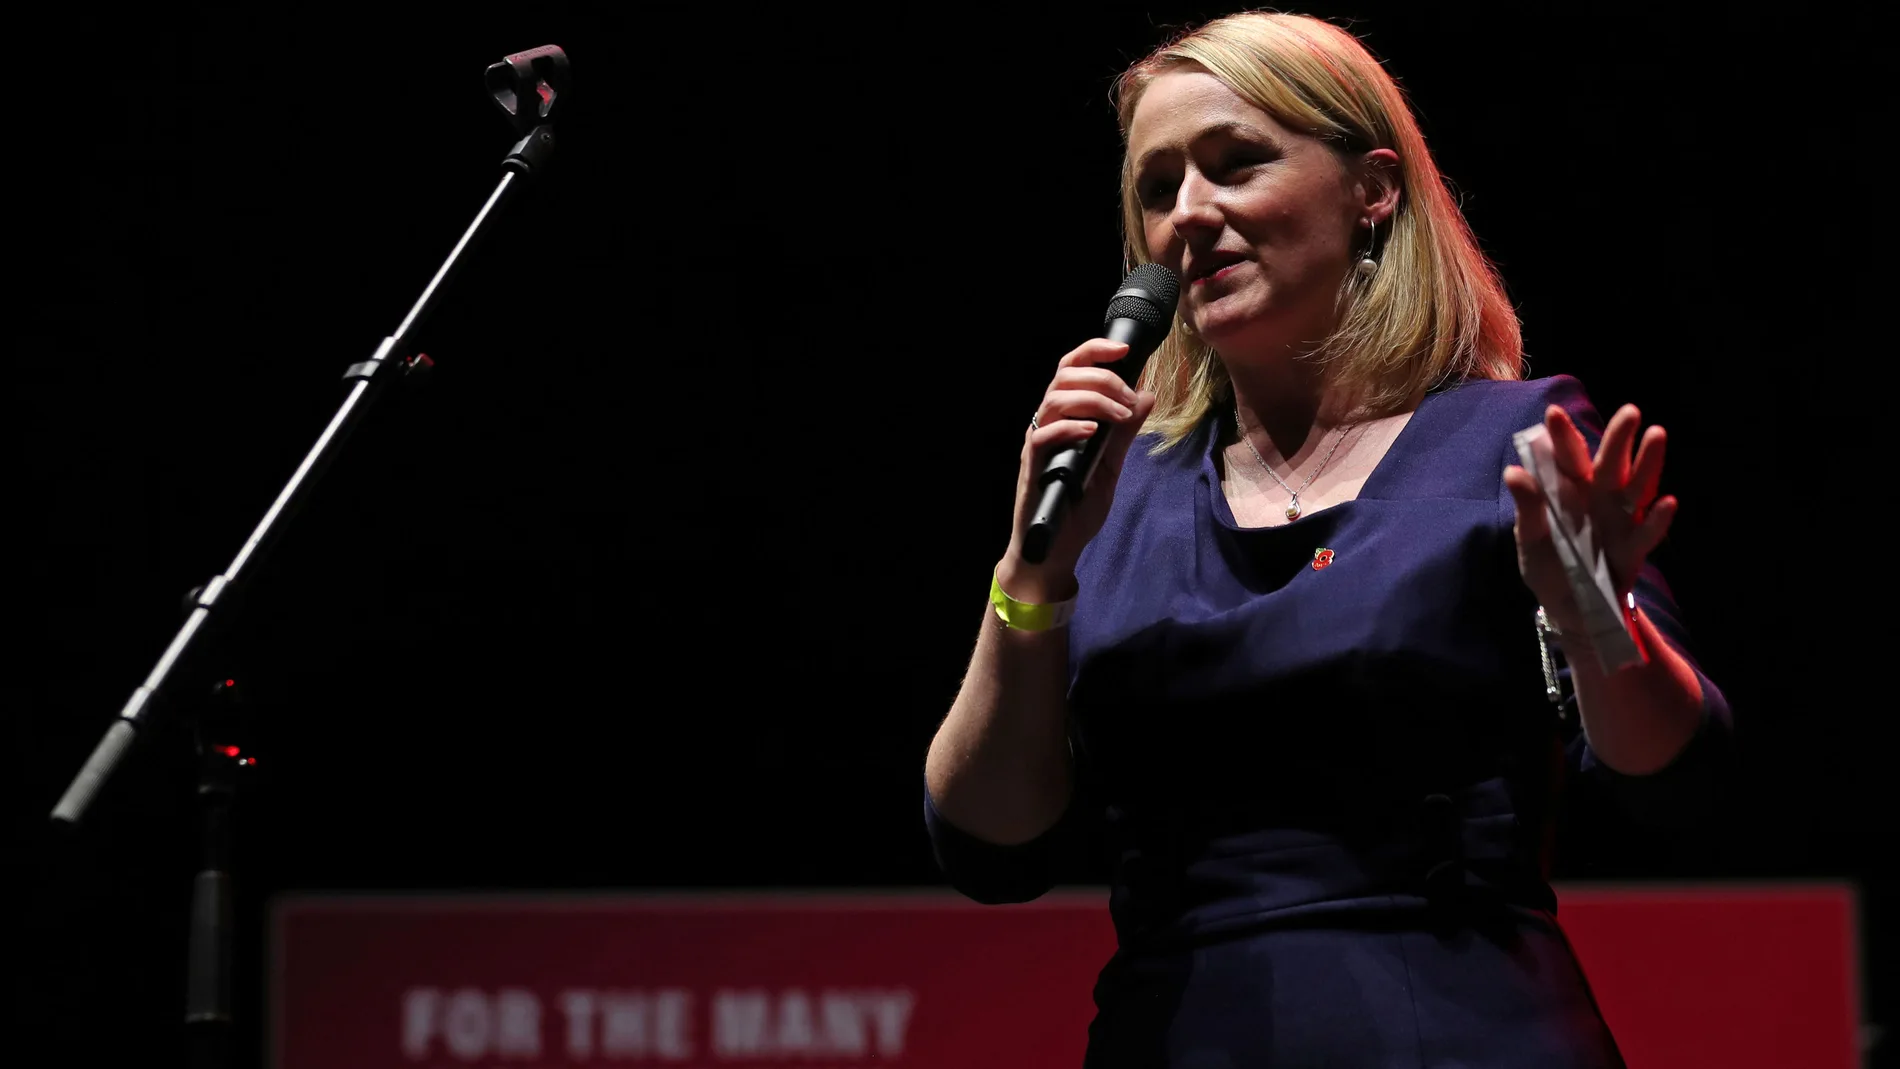 Labour's Shadow Secretary of State for Business, Energy and Industrial Strategy Rebecca Long-Bailey speaks at a general election campaign event in Manchester